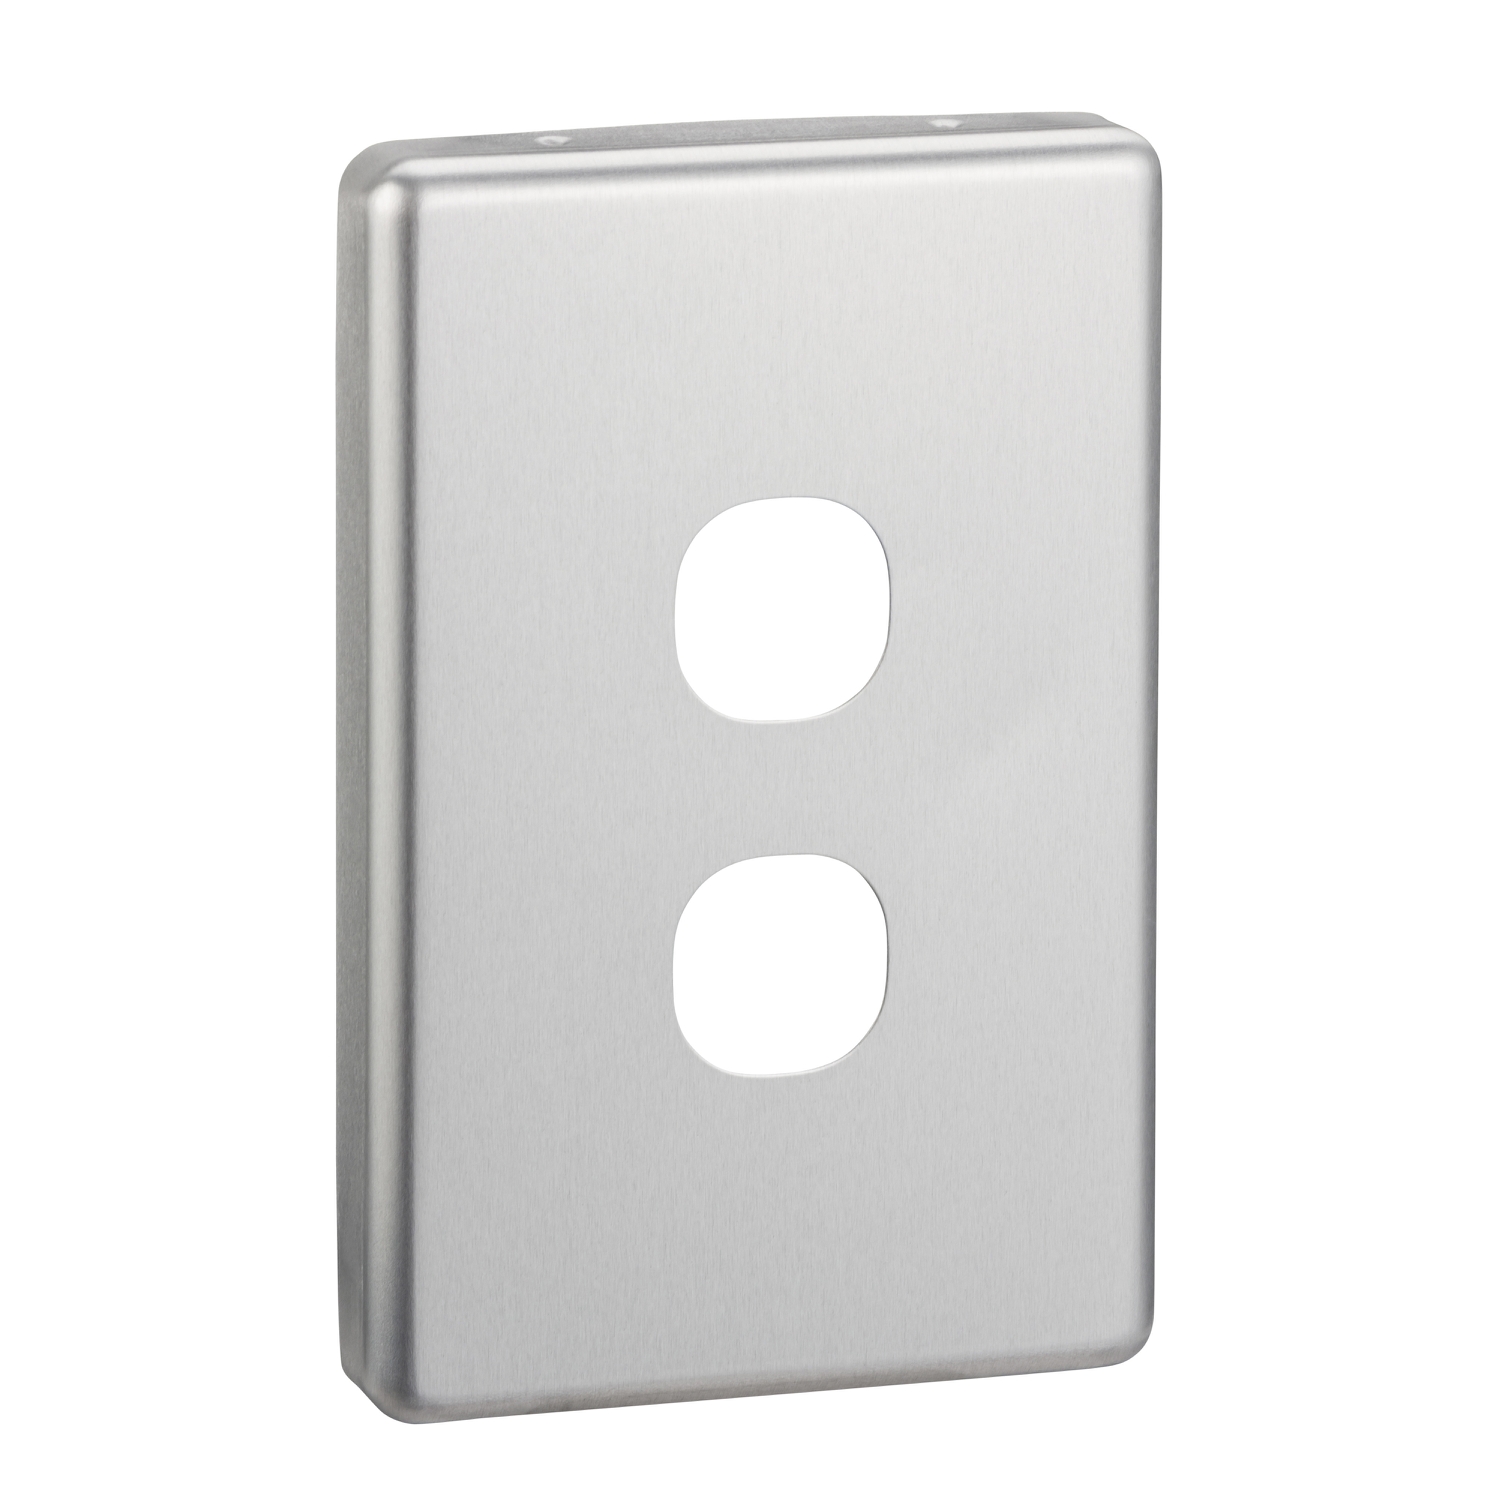 Switch Plate Covers - 2 Gang